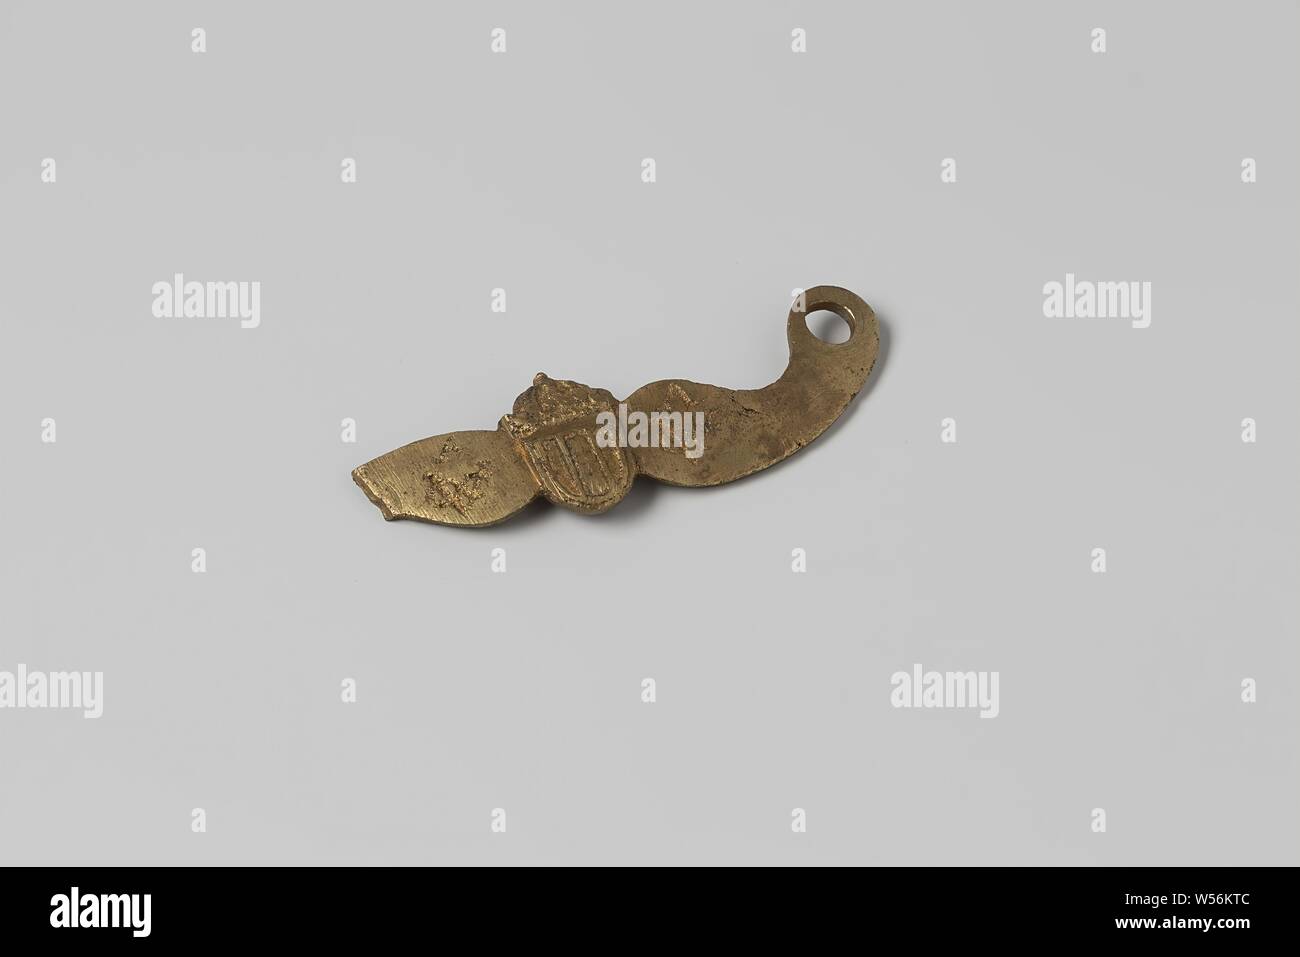 Fragment screw plate of a musket from the wreck of the East Indies ship Hollandia, left eye cut off, notches or fitting screw on cut edge, side plate, Annet, Dutch East India Company, Hollandia (ship), anonymous, Netherlands, 1700 - in or before 13-Aug-1743, copper (metal), h 8.3 cm × w 2.7 cm × d 0.3 cm Stock Photo